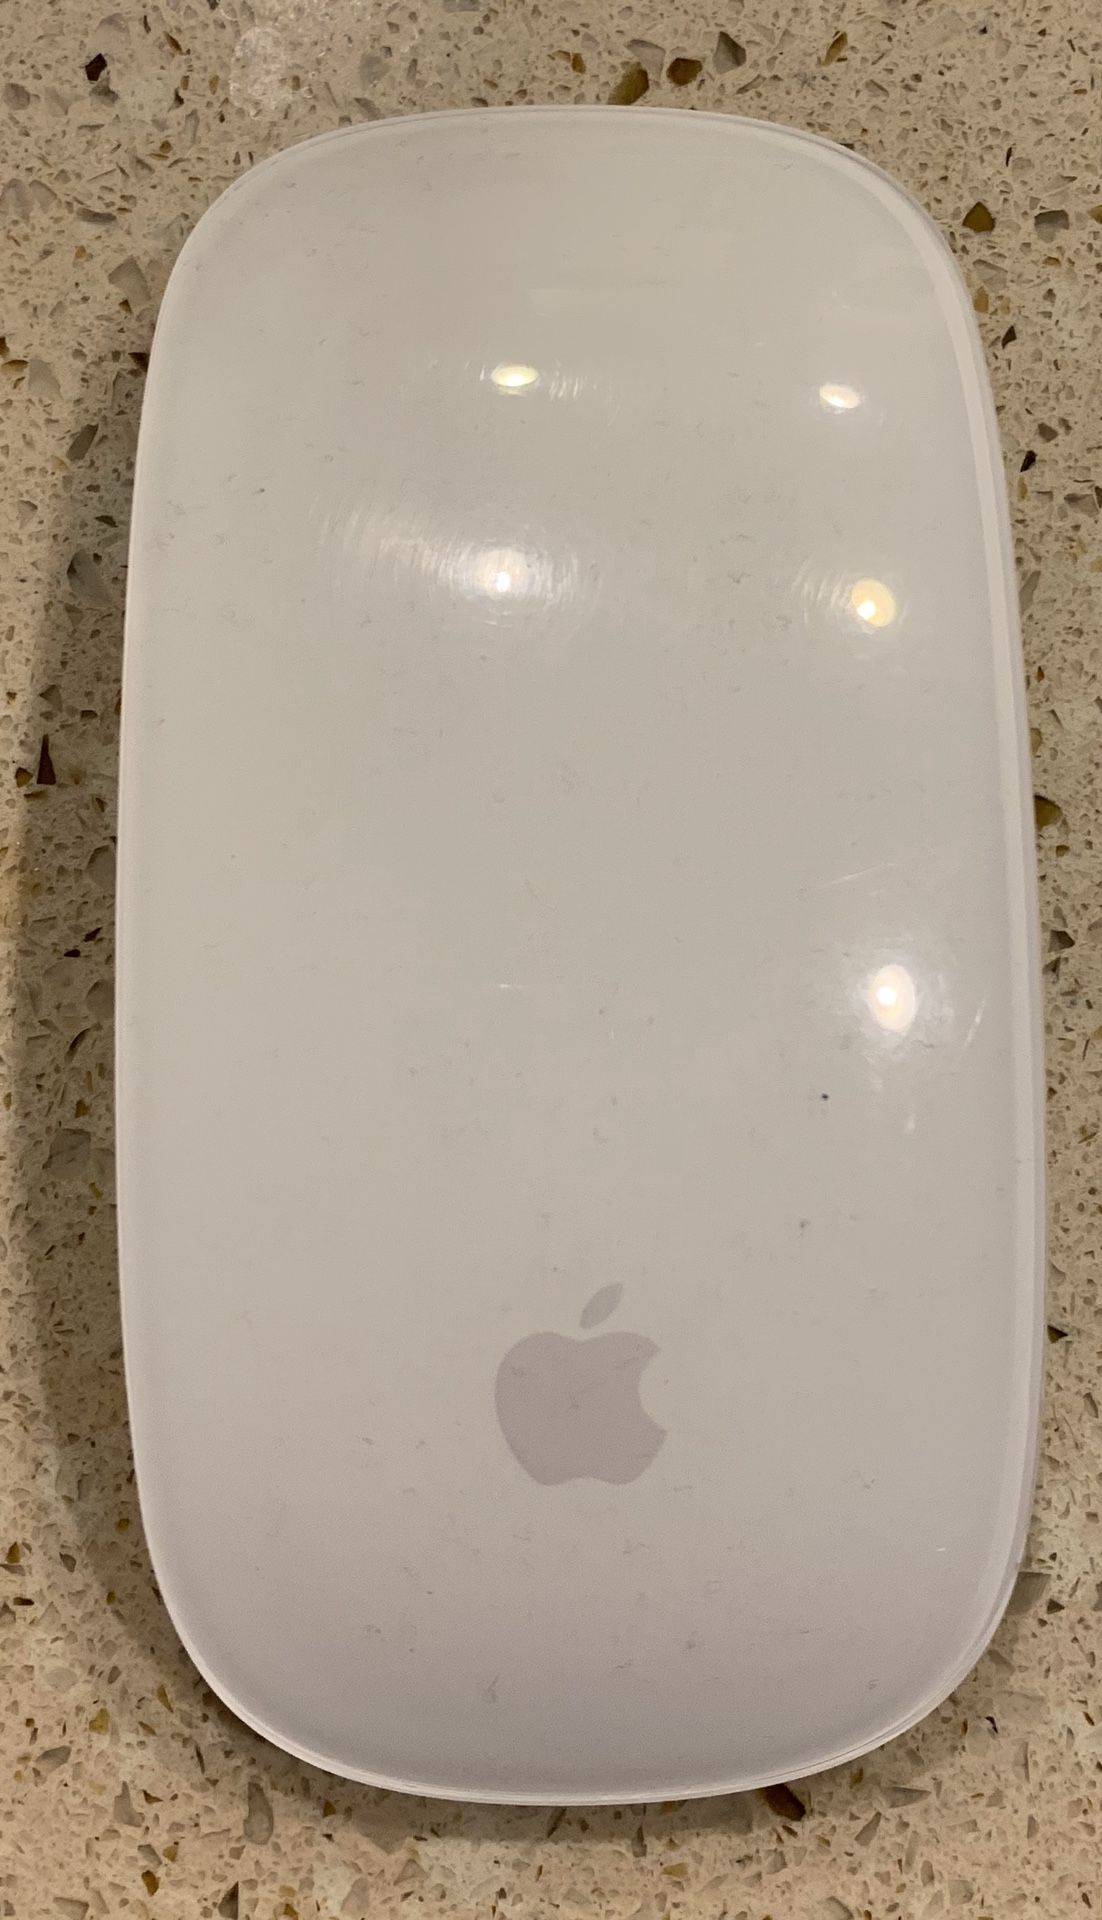 Apple Wireless mouse